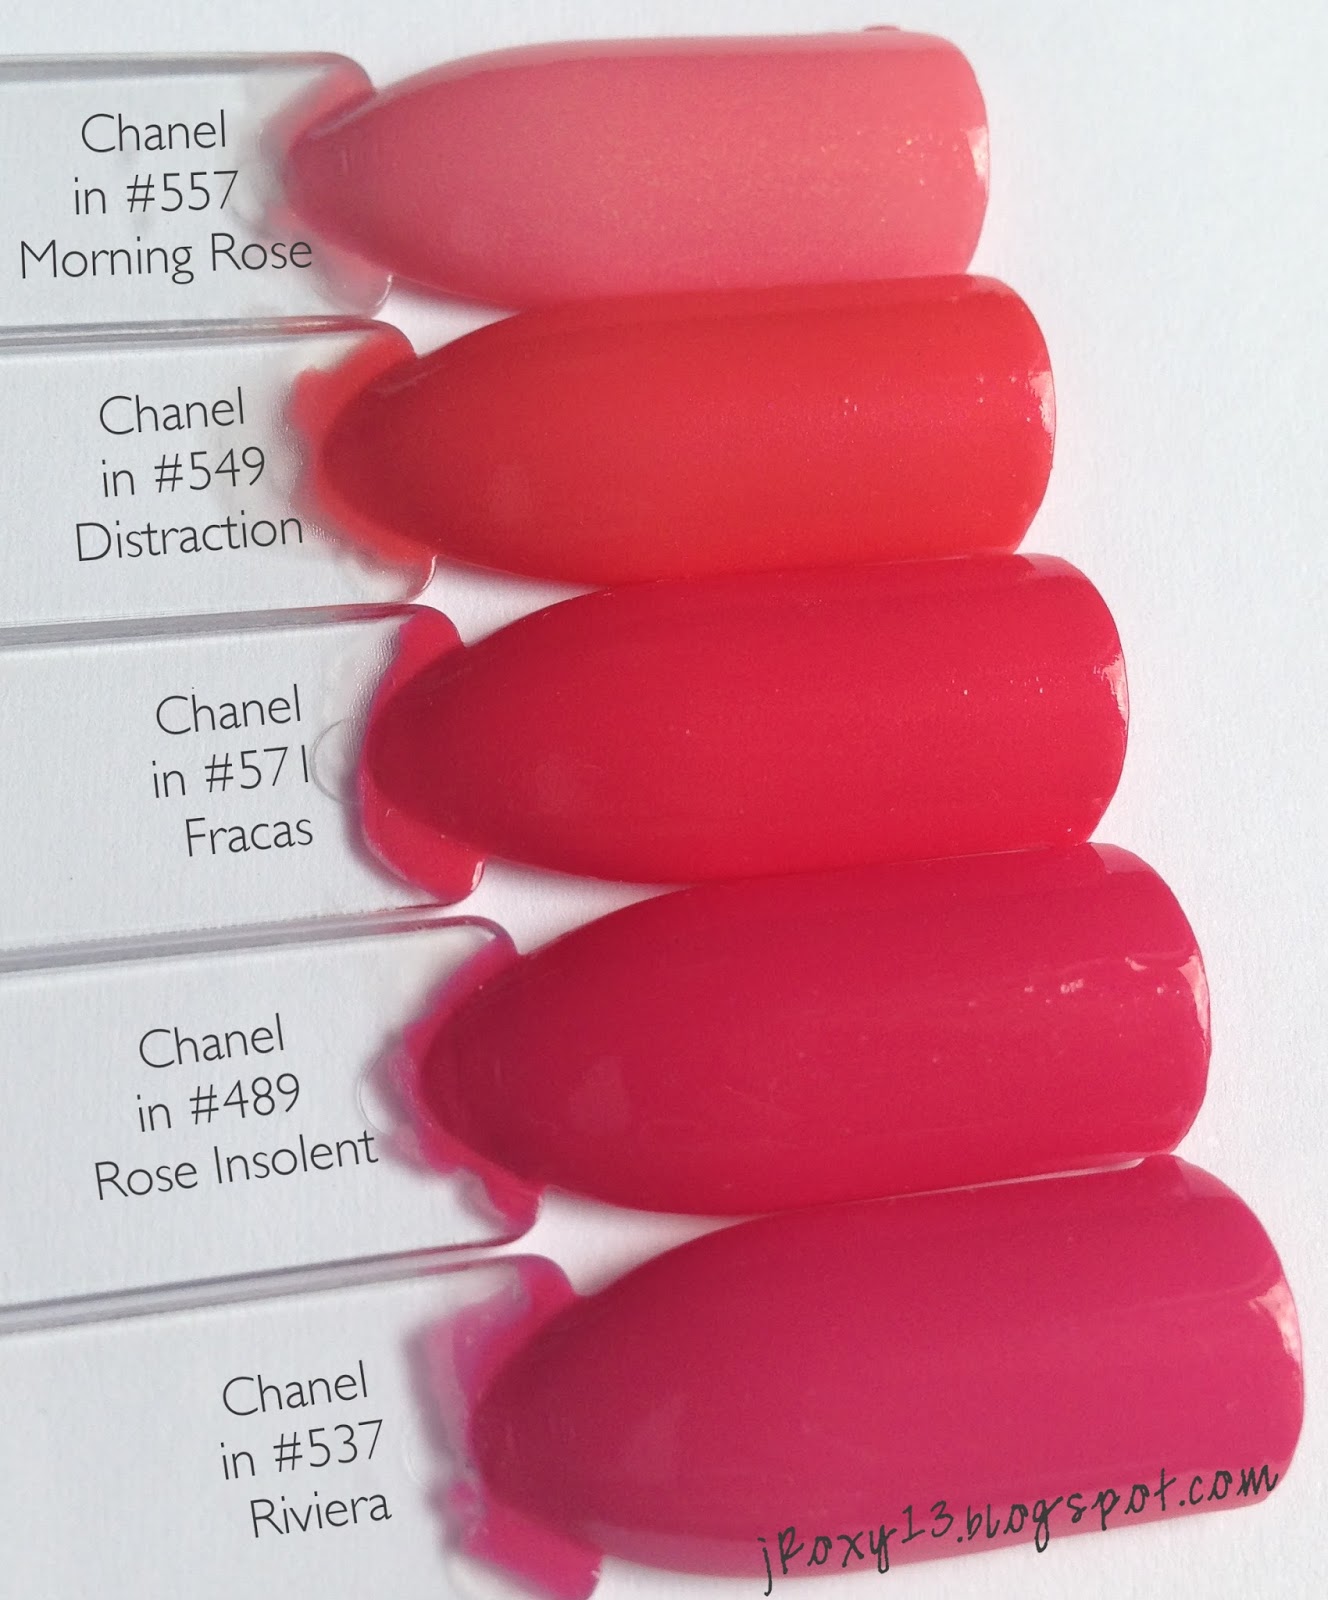 Chanel in #571 Fracas + Comparisons